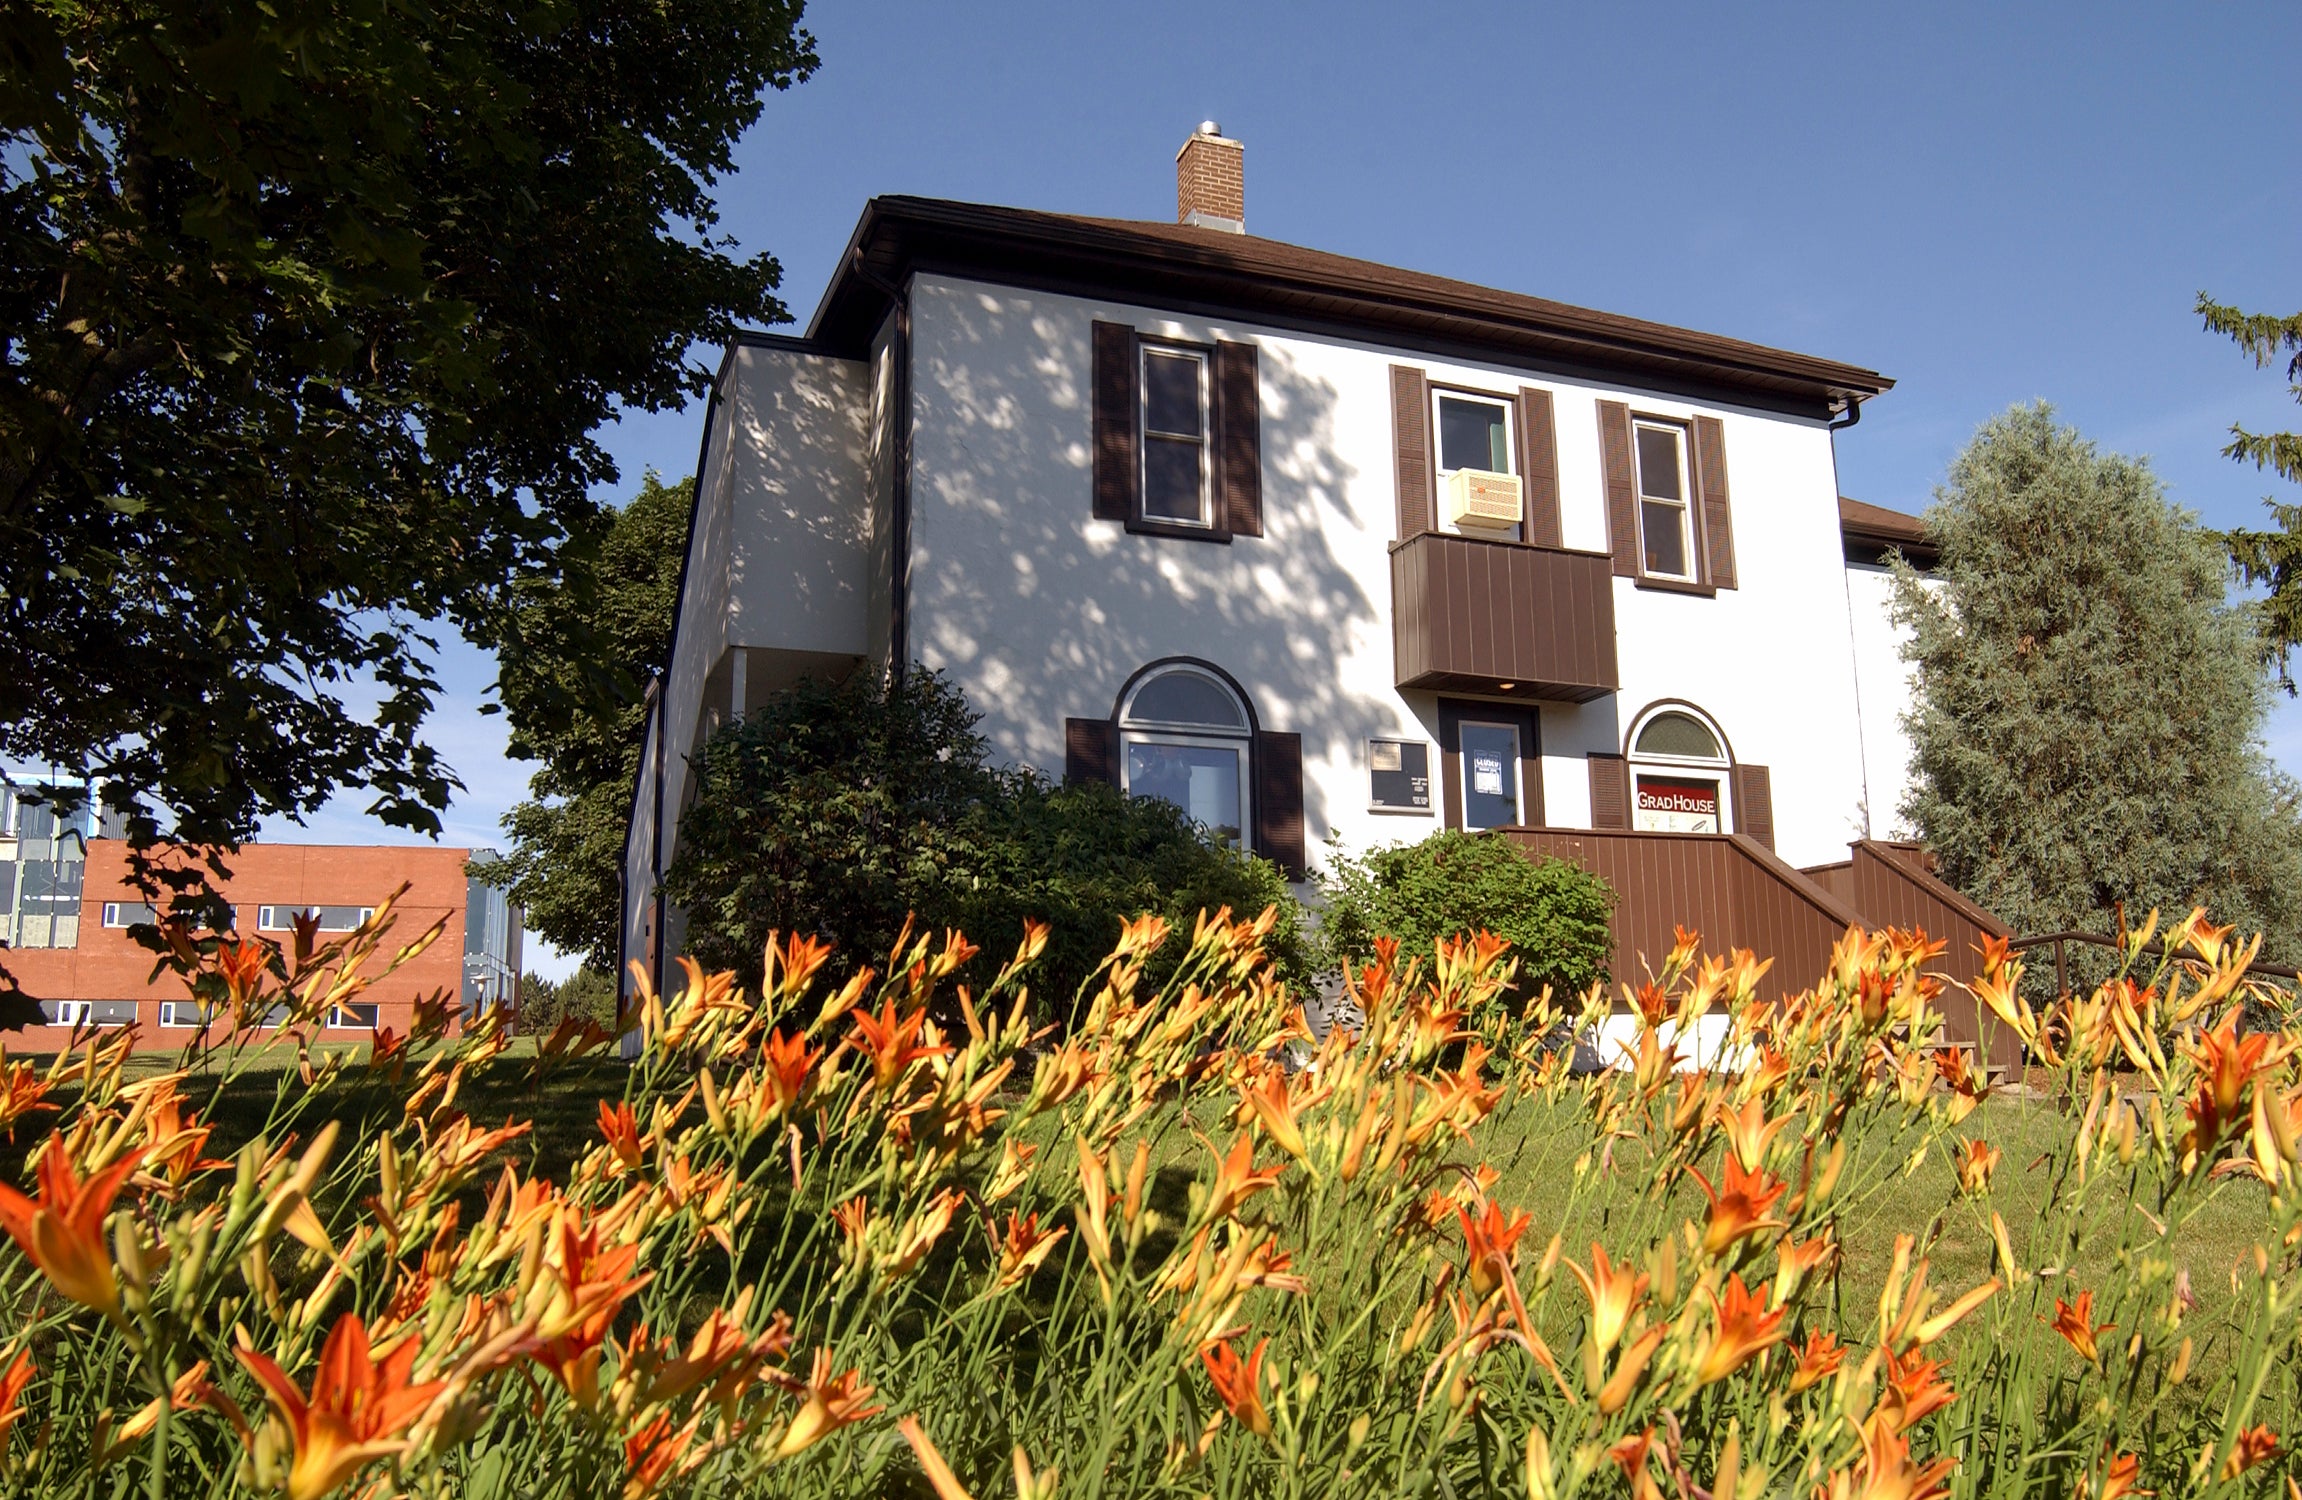 Grad house with tiger lillies in front